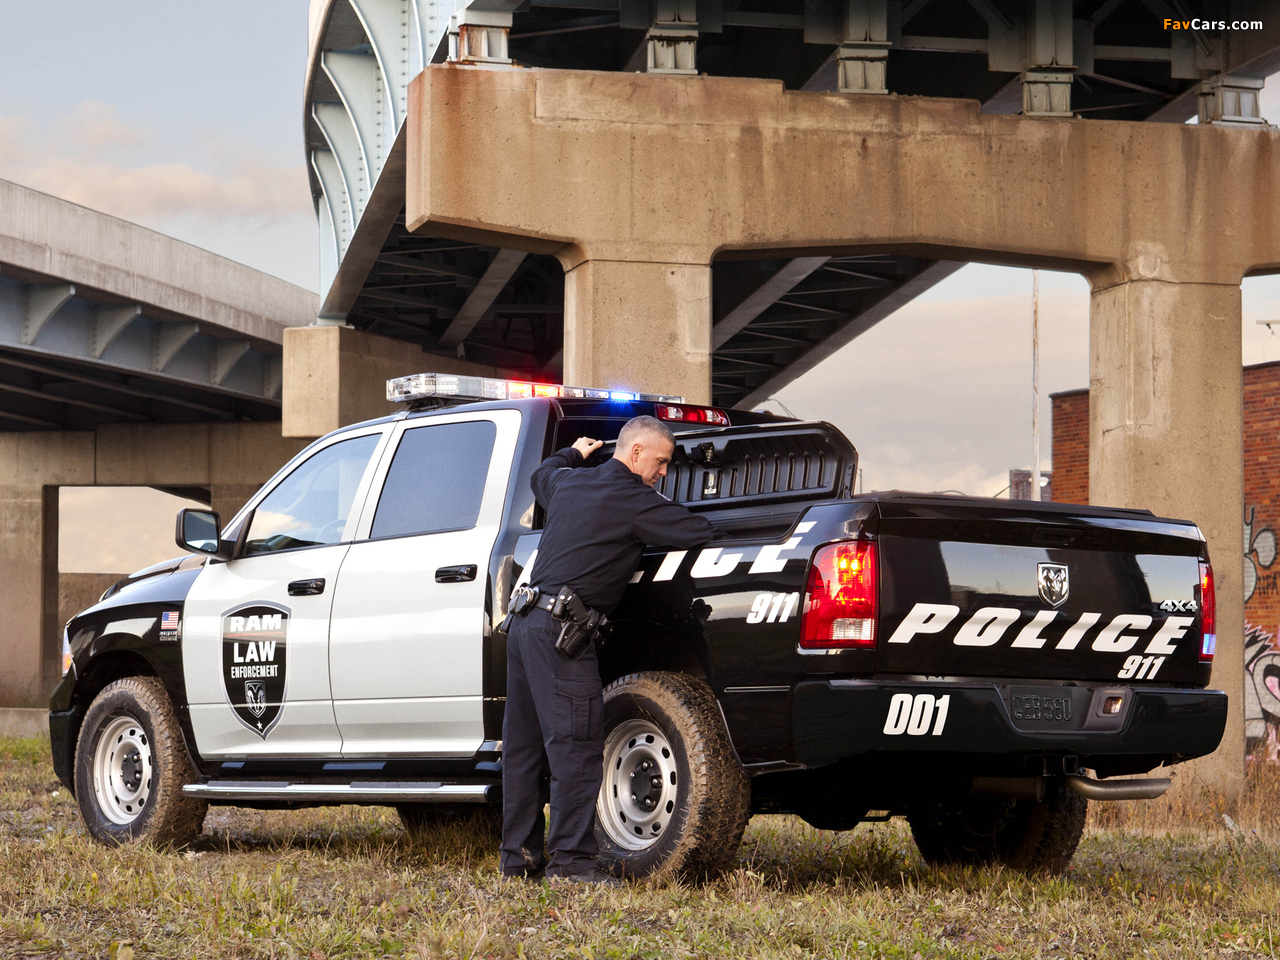 Ram 1500 Crew Cab Special Service Package Police Truck 2011 pictures (1280 x 960)